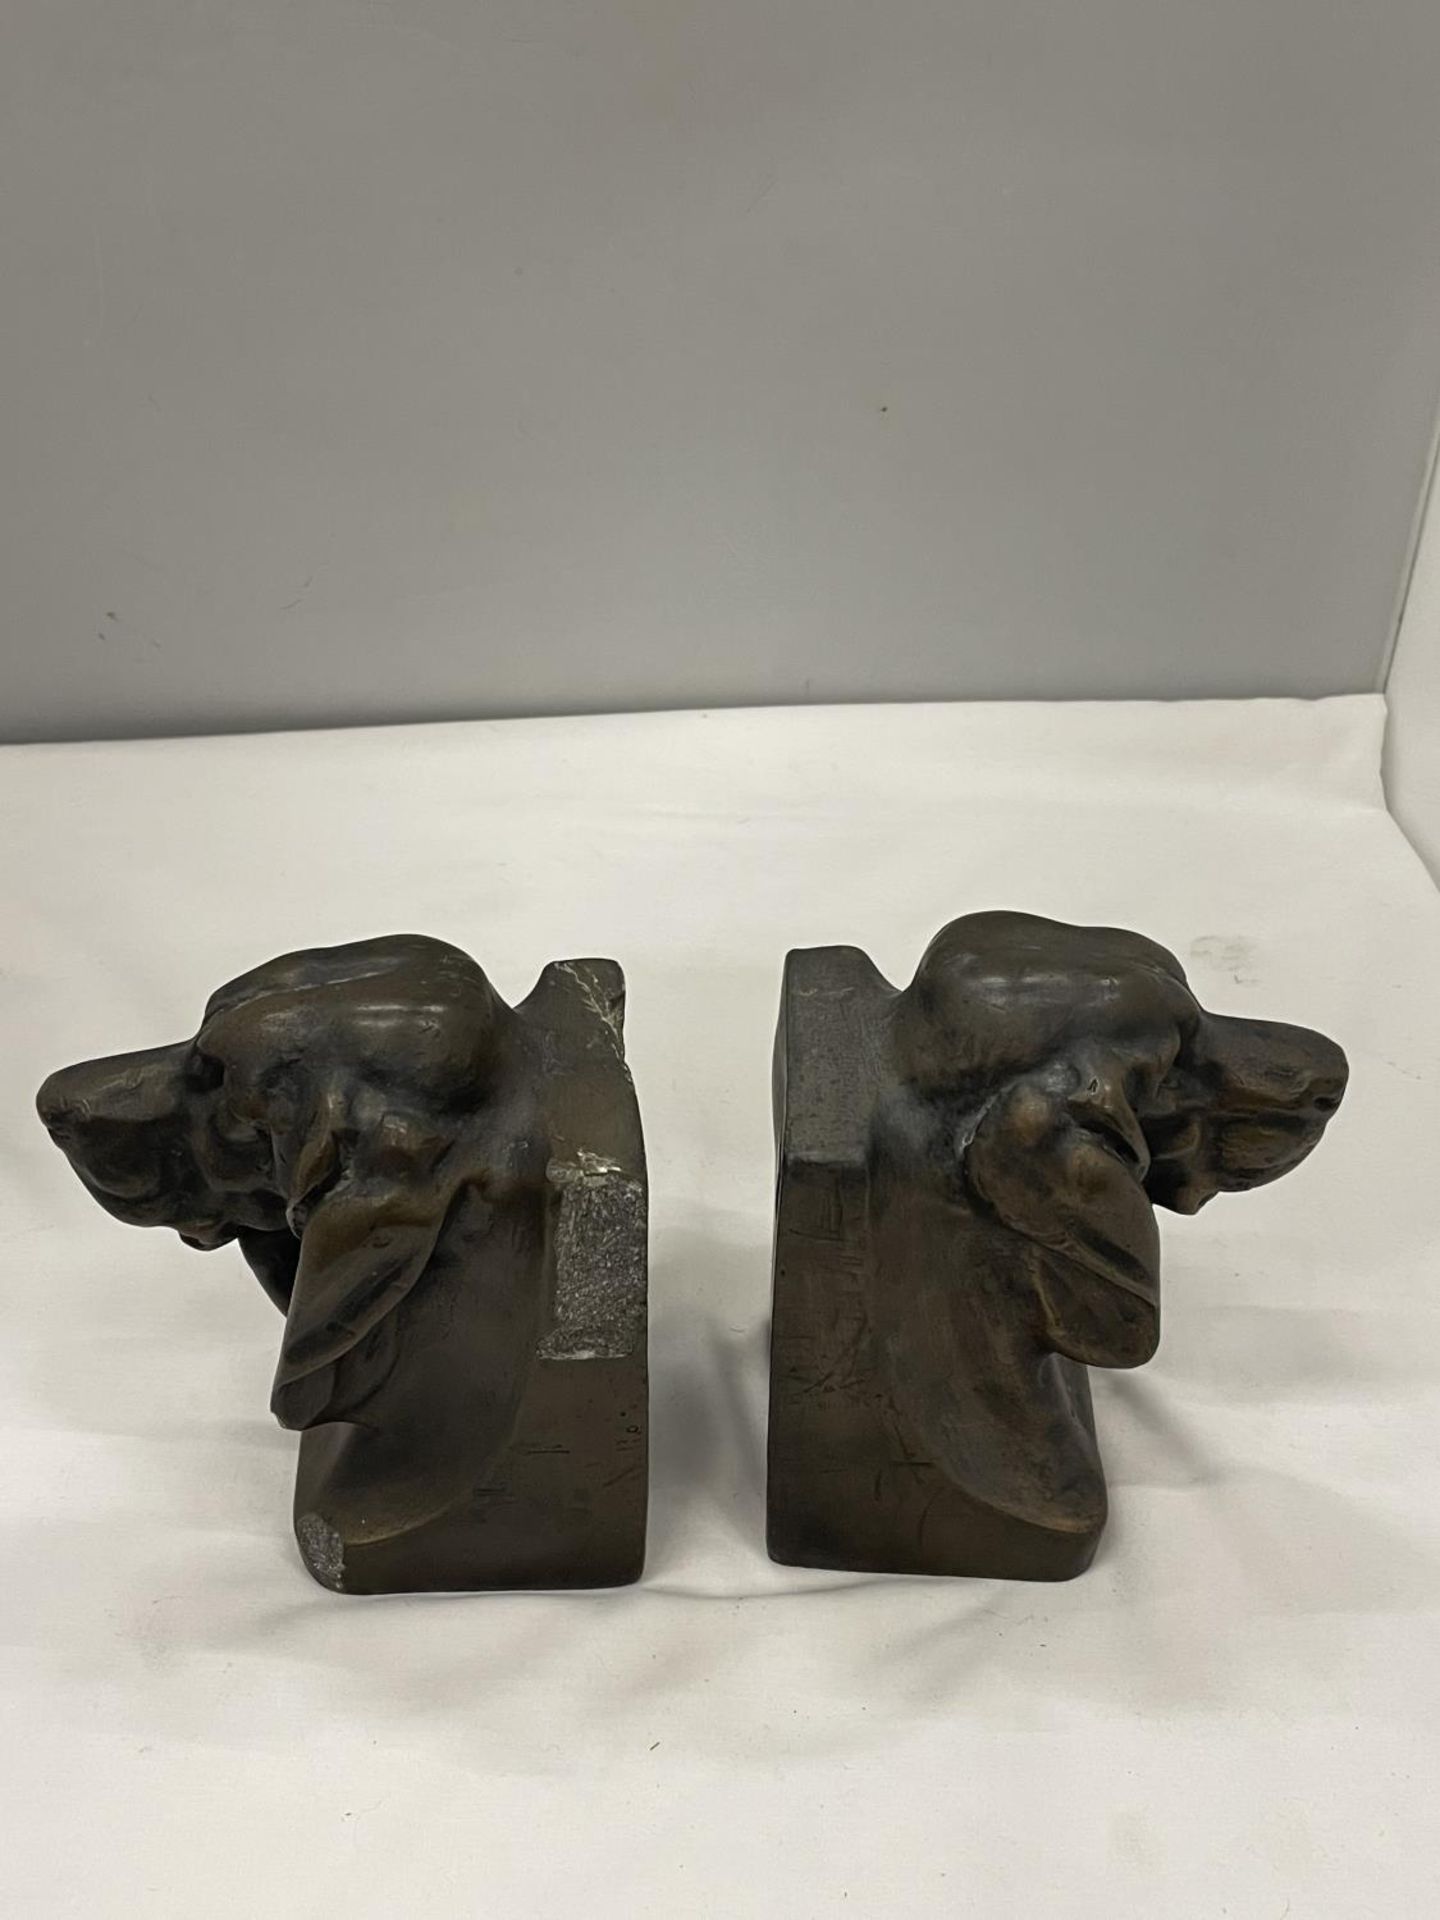 A PAIR OF DOGS HEAD BOOK ENDS - Image 2 of 3